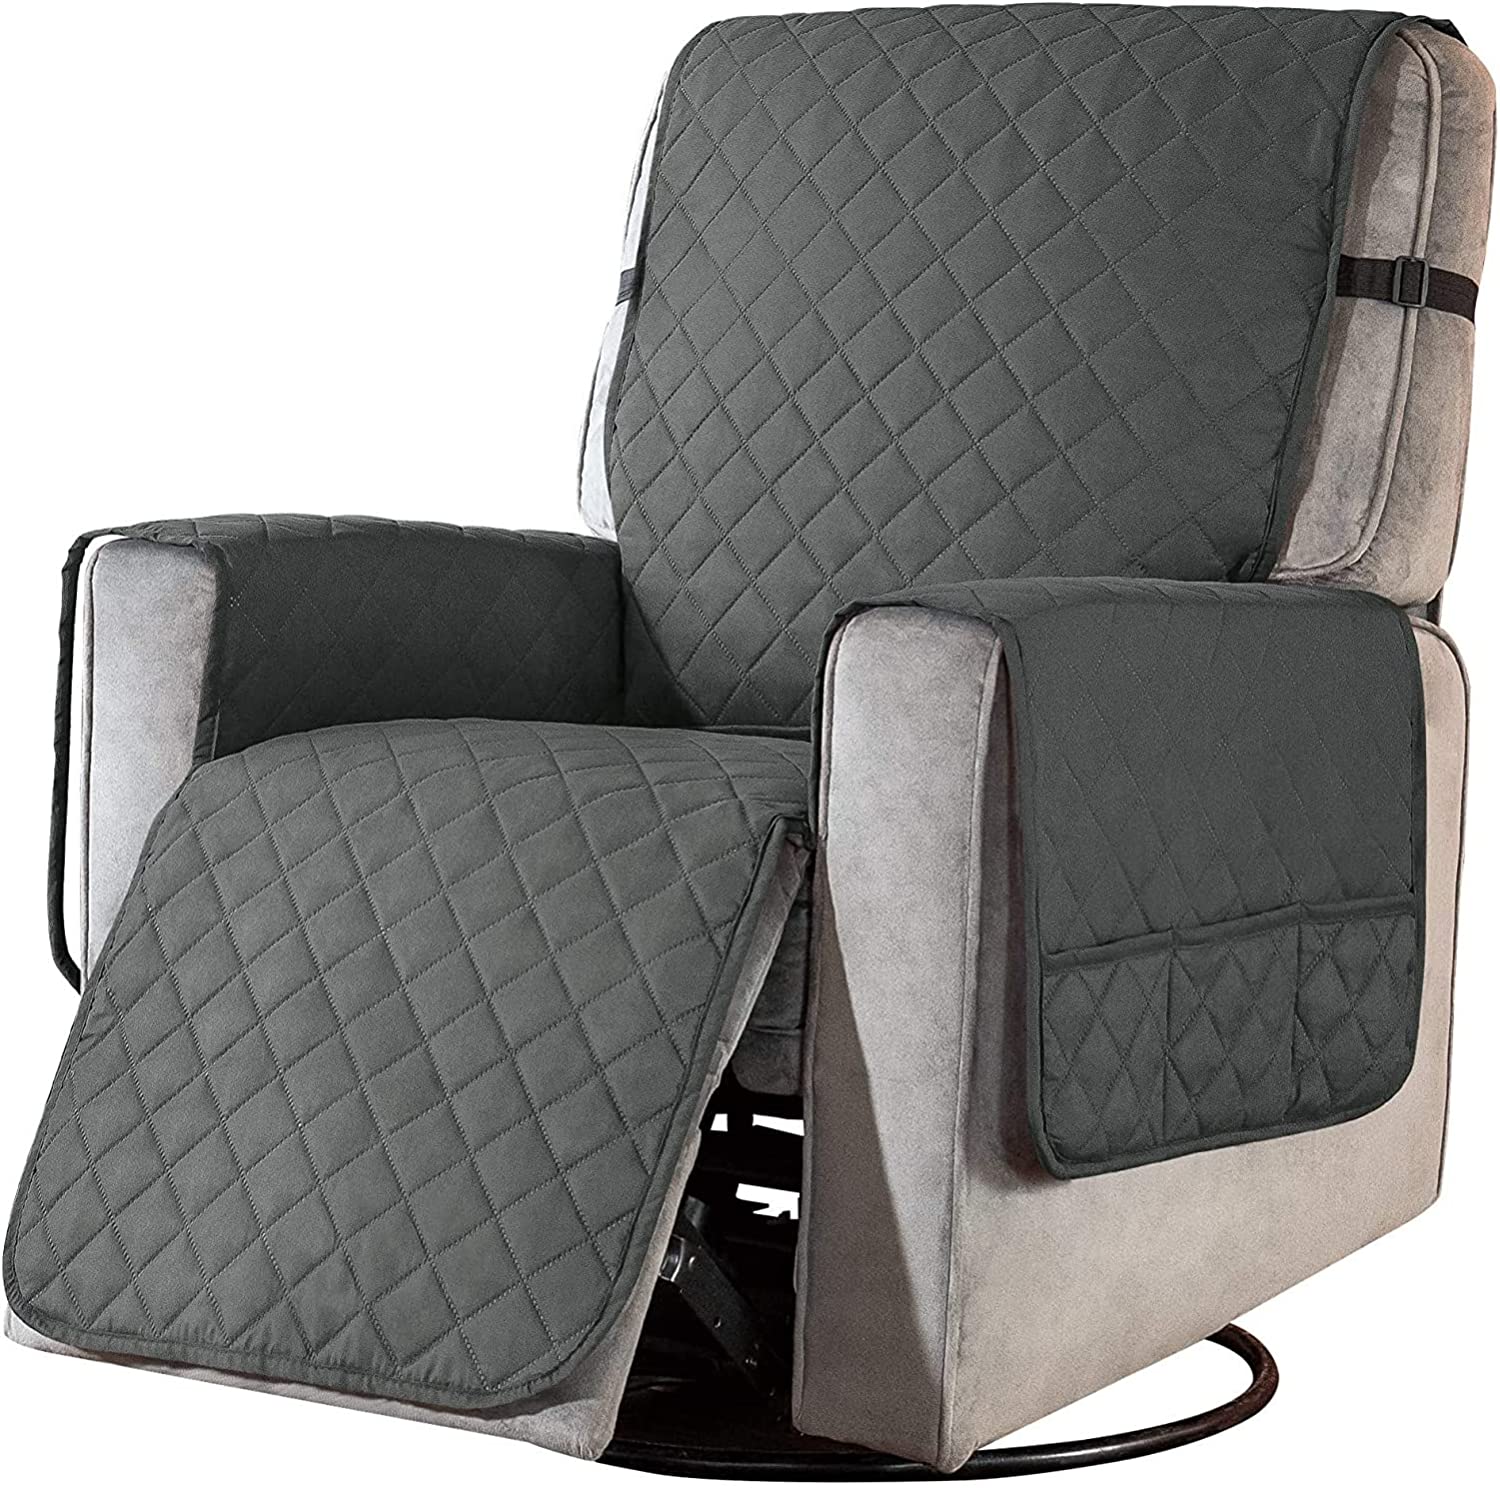 FLOOFI Pet Sofa Cover Recliner Chair S Size with Pocket (Grey)